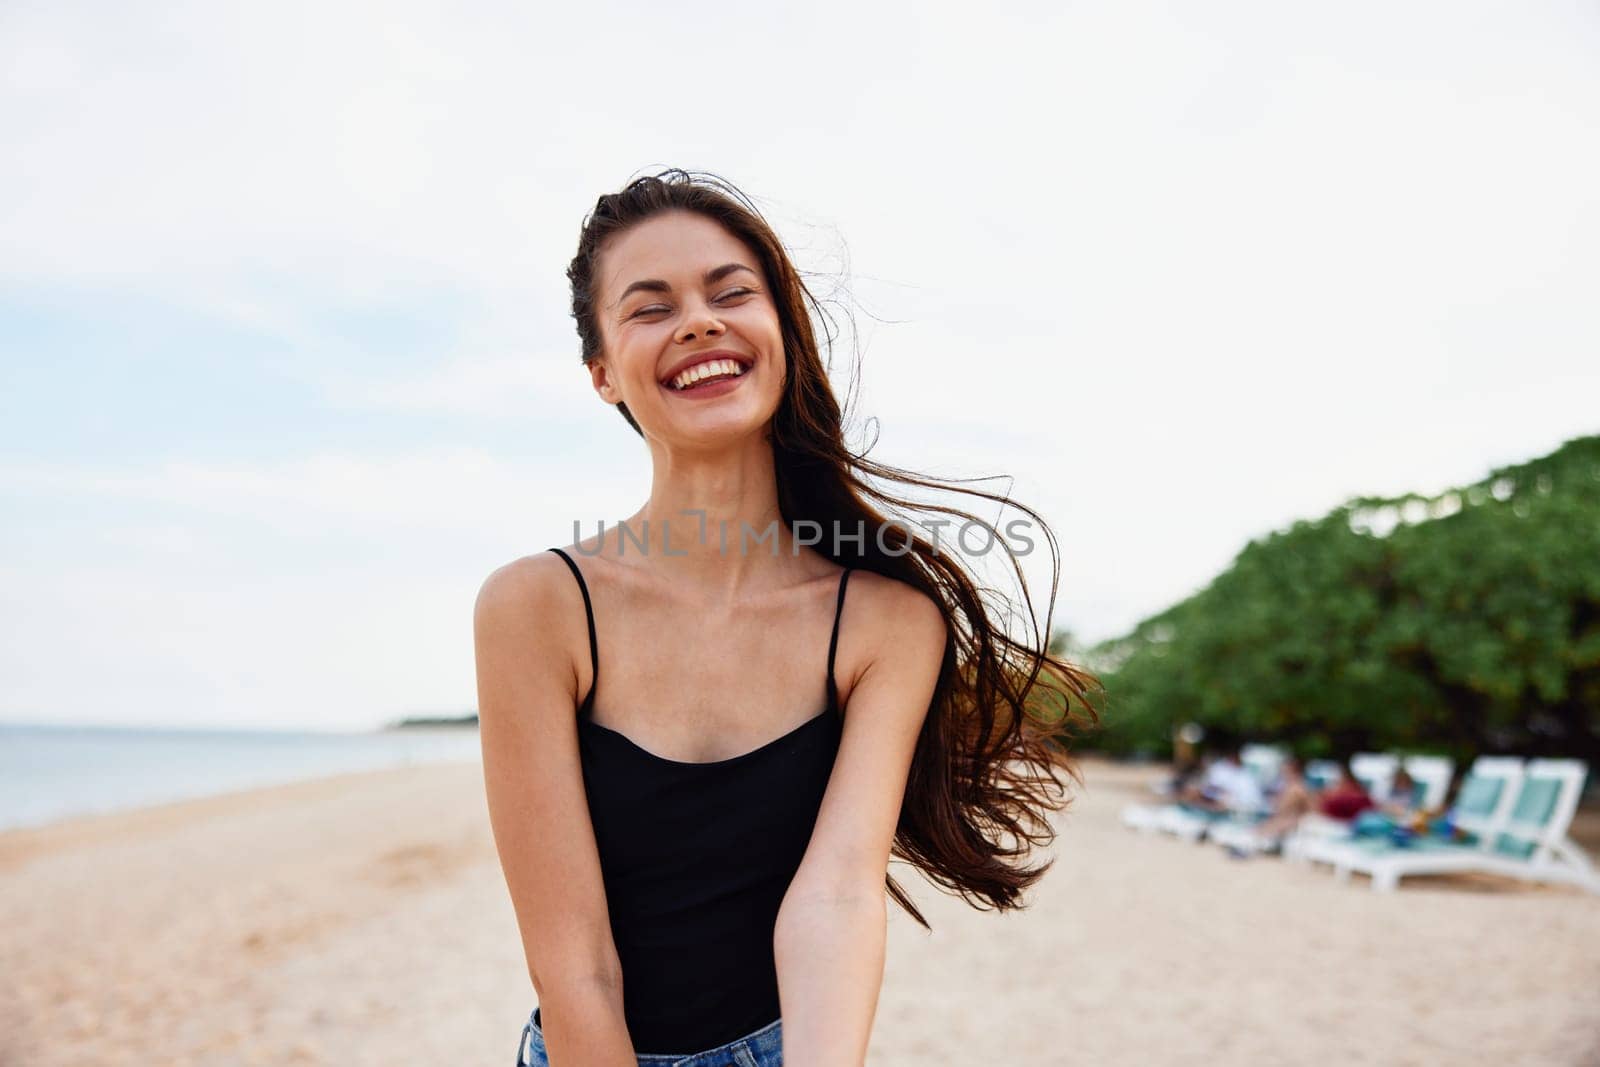 nature woman sand vacation outdoor sea summer shore walk peaceful ocean walking young beach sun dress lifestyle smile smiling female sunlight